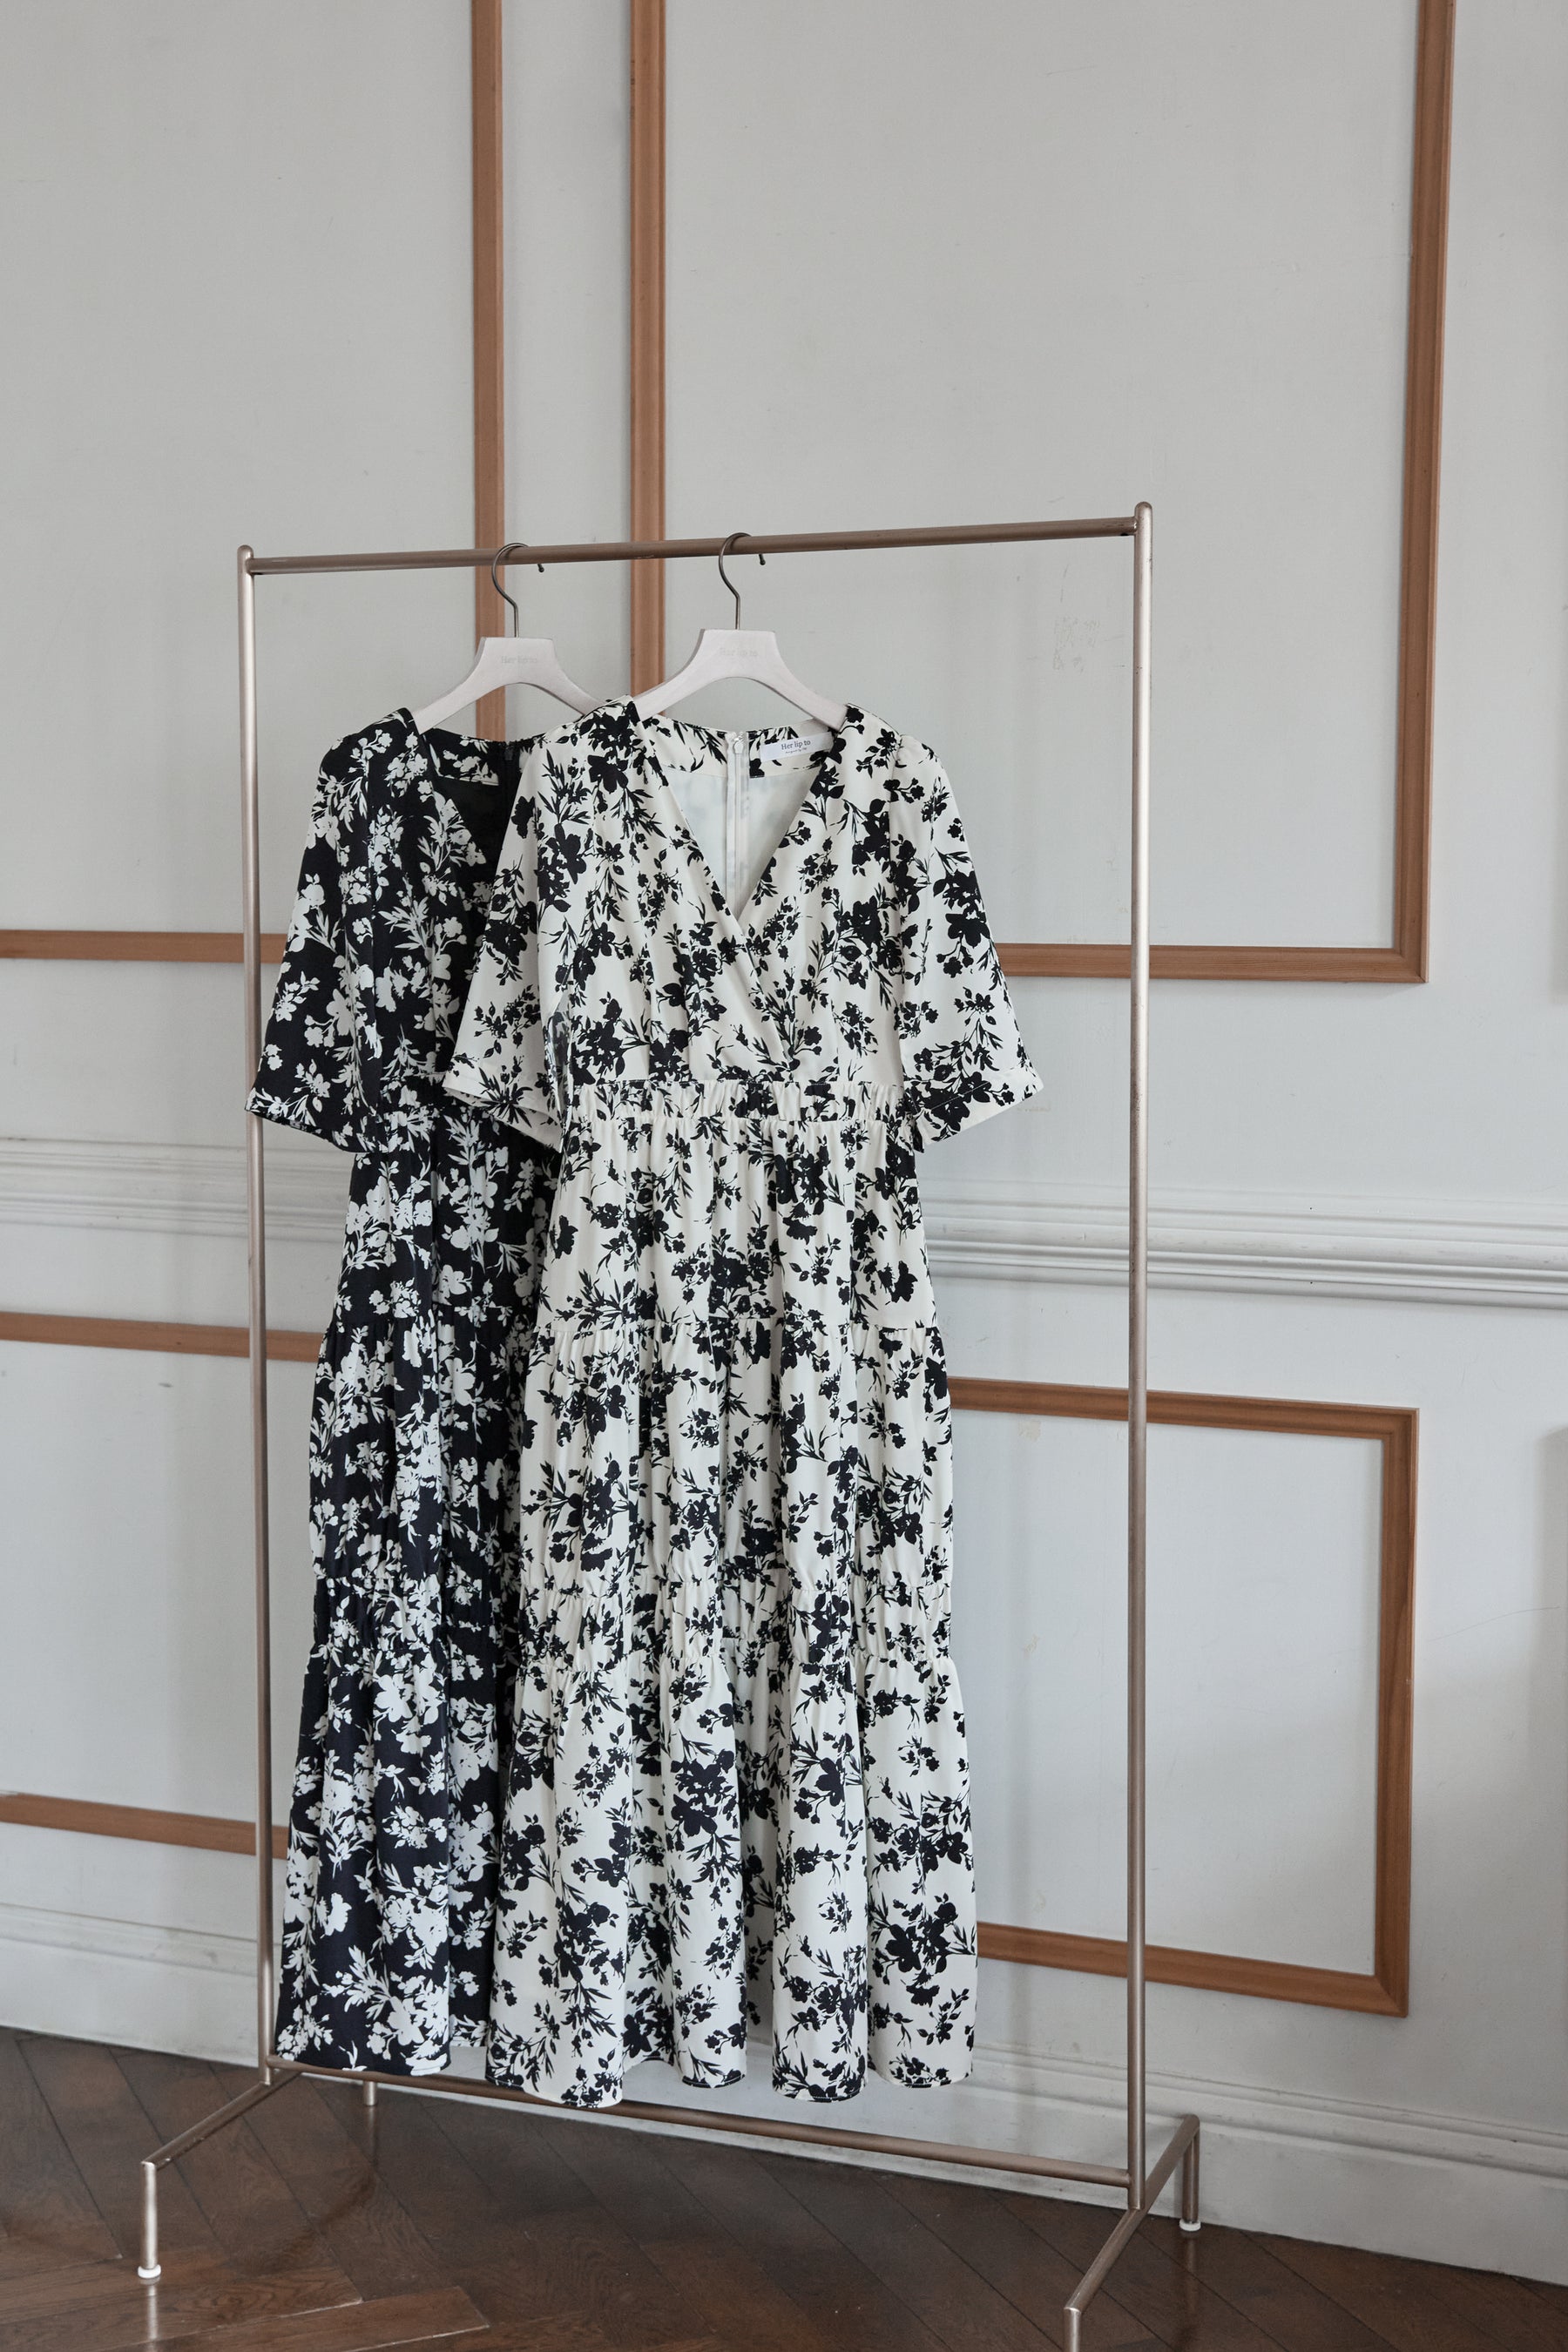 Her lip to Monotone Floral Pleated Dress